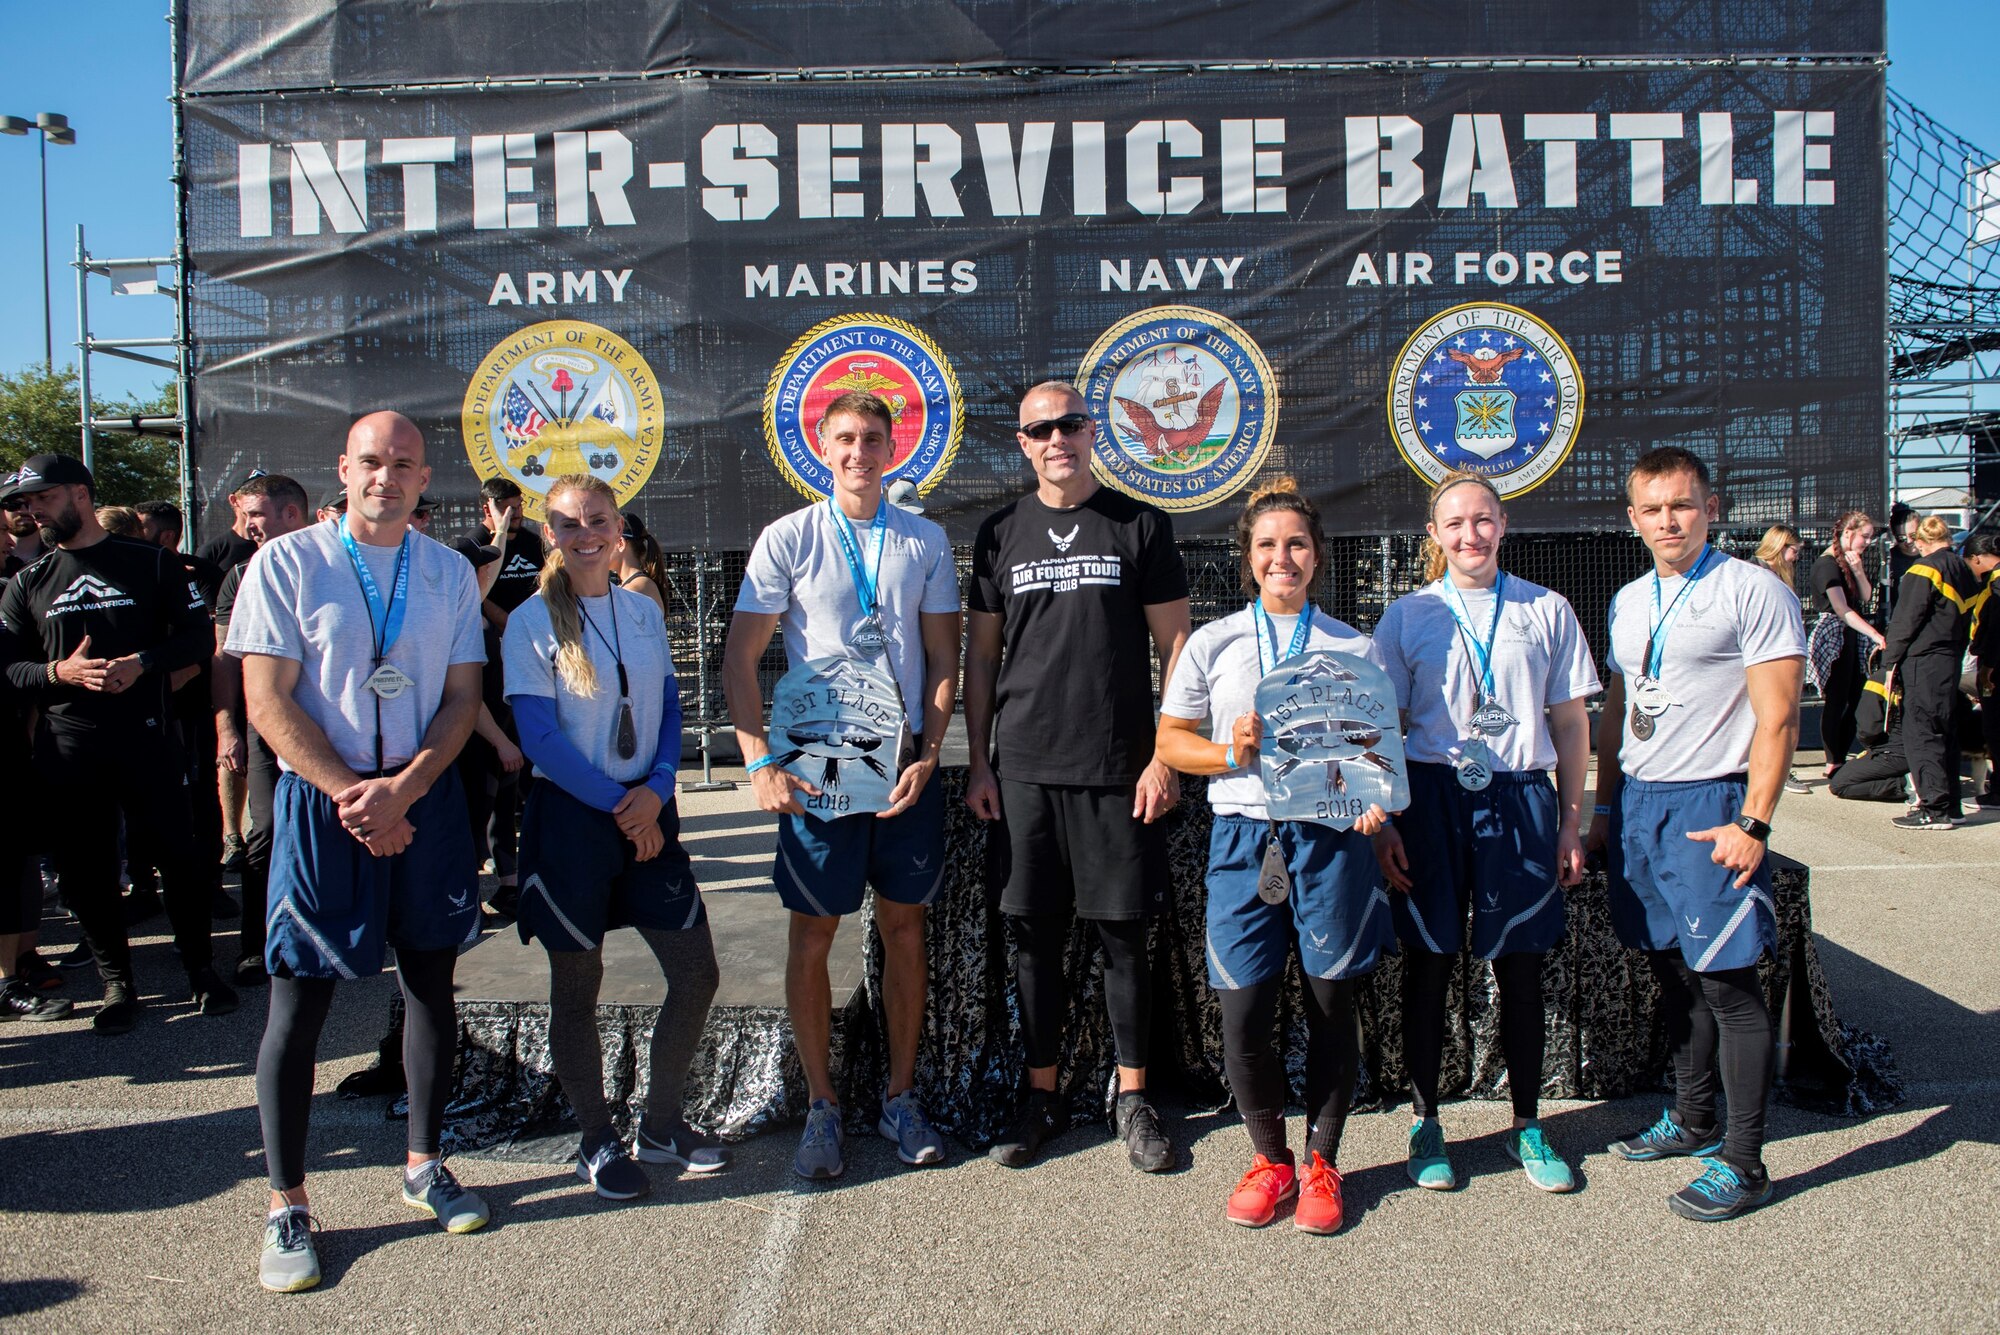 Winners from the 2018 Air Force Alpha Warrior Final Battle pose for photos during the awards ceremony, Friday, November 16, 2018 at the Alpha Warrior Proving Grounds, Retama Park, Selma, Texas.